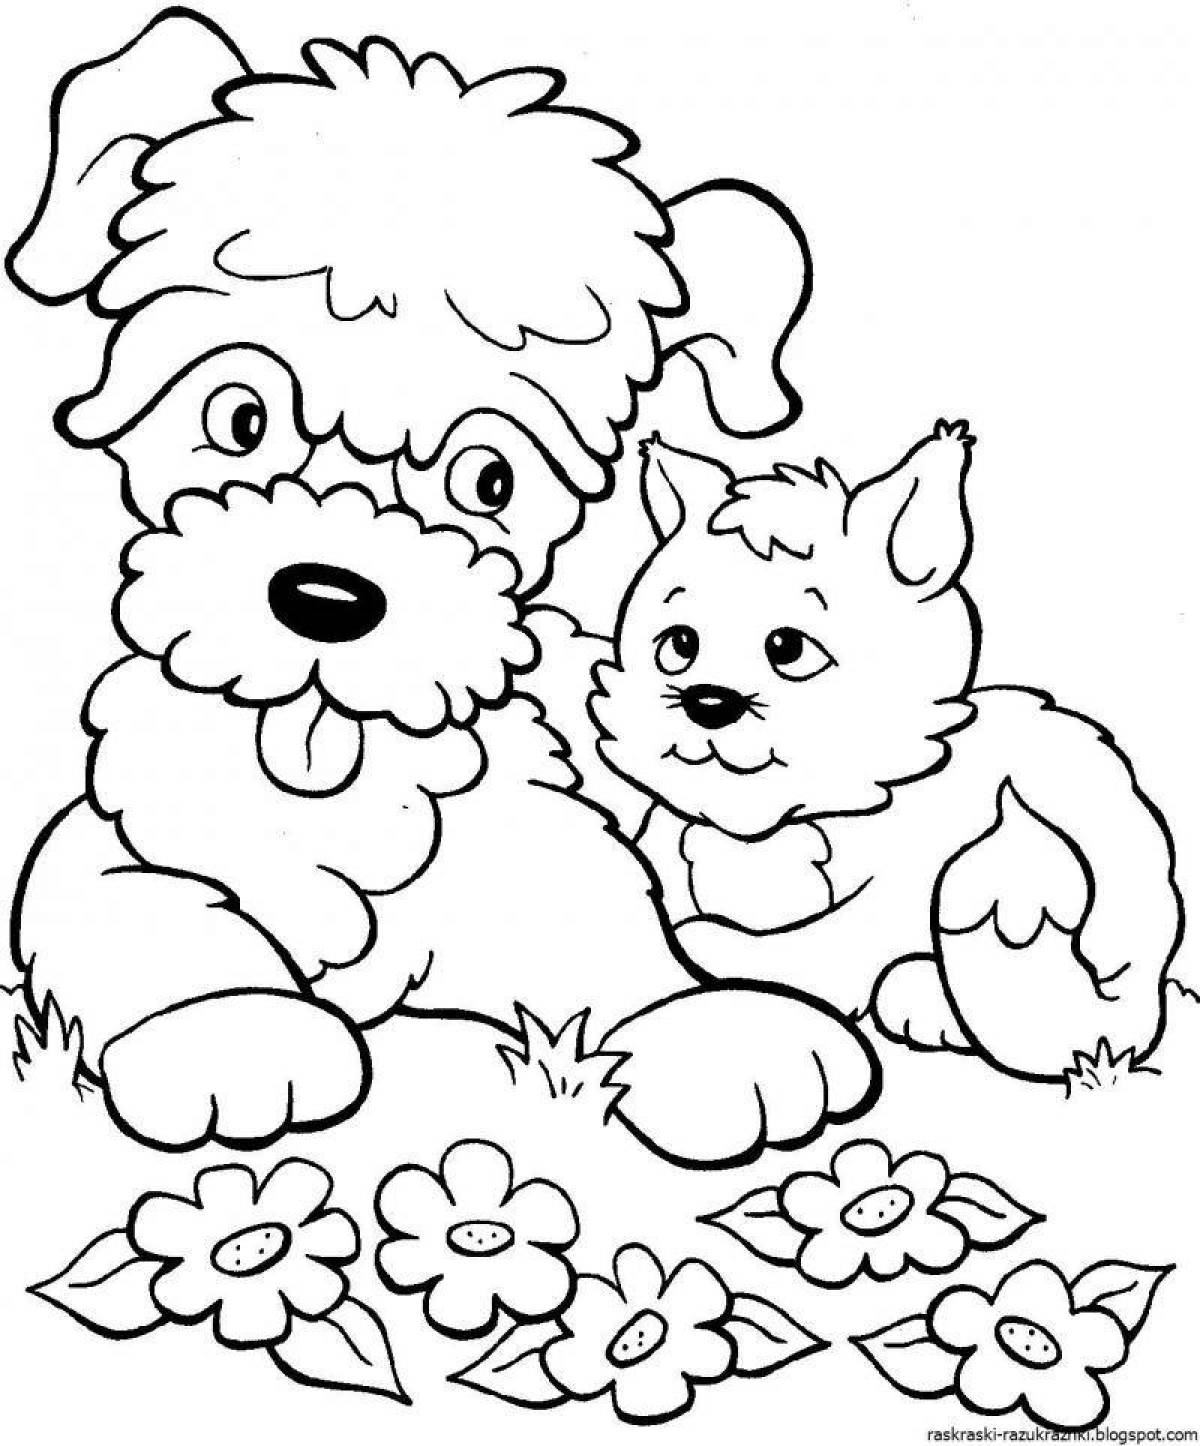 Adorable coloring page animals cats and dogs